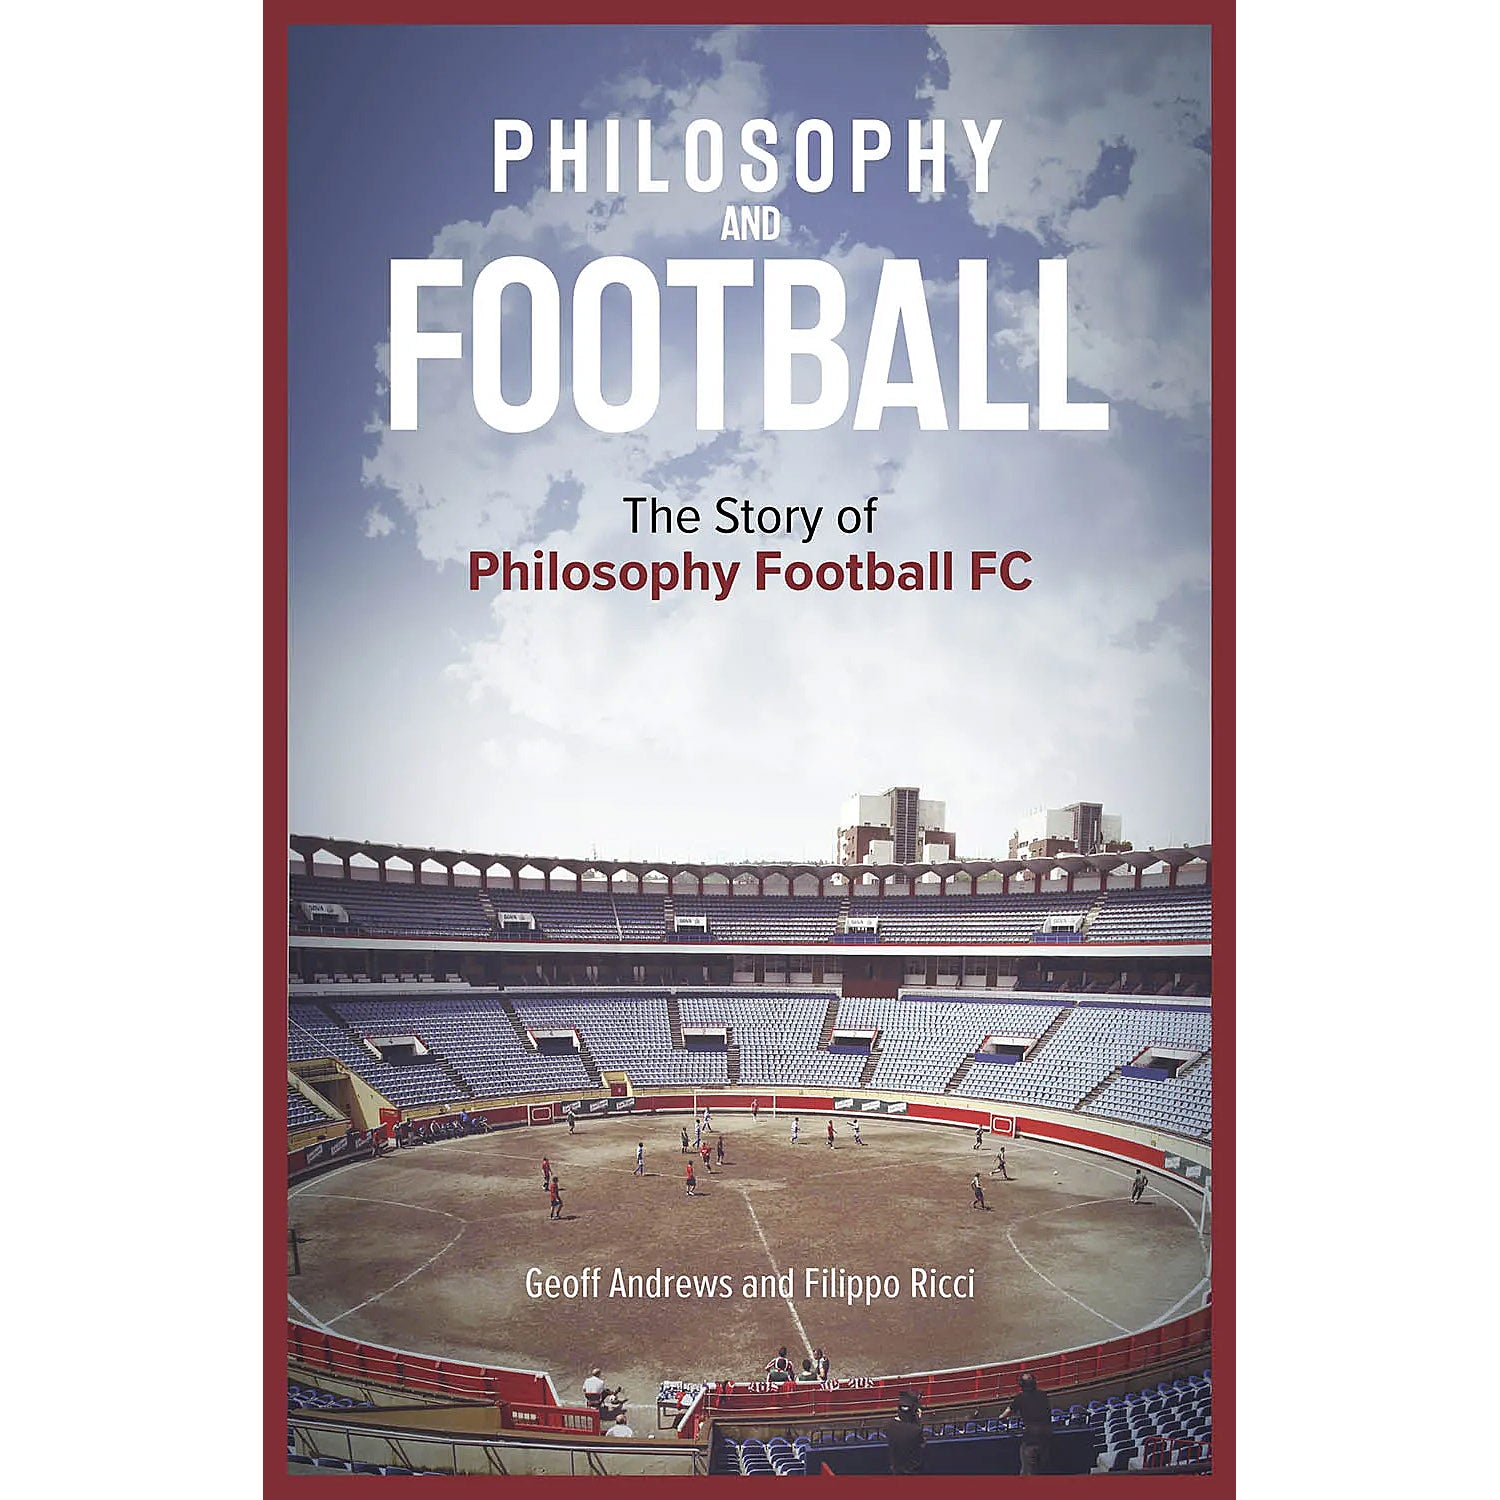 Philosophy and Football – The Story of Philosophy Football FC